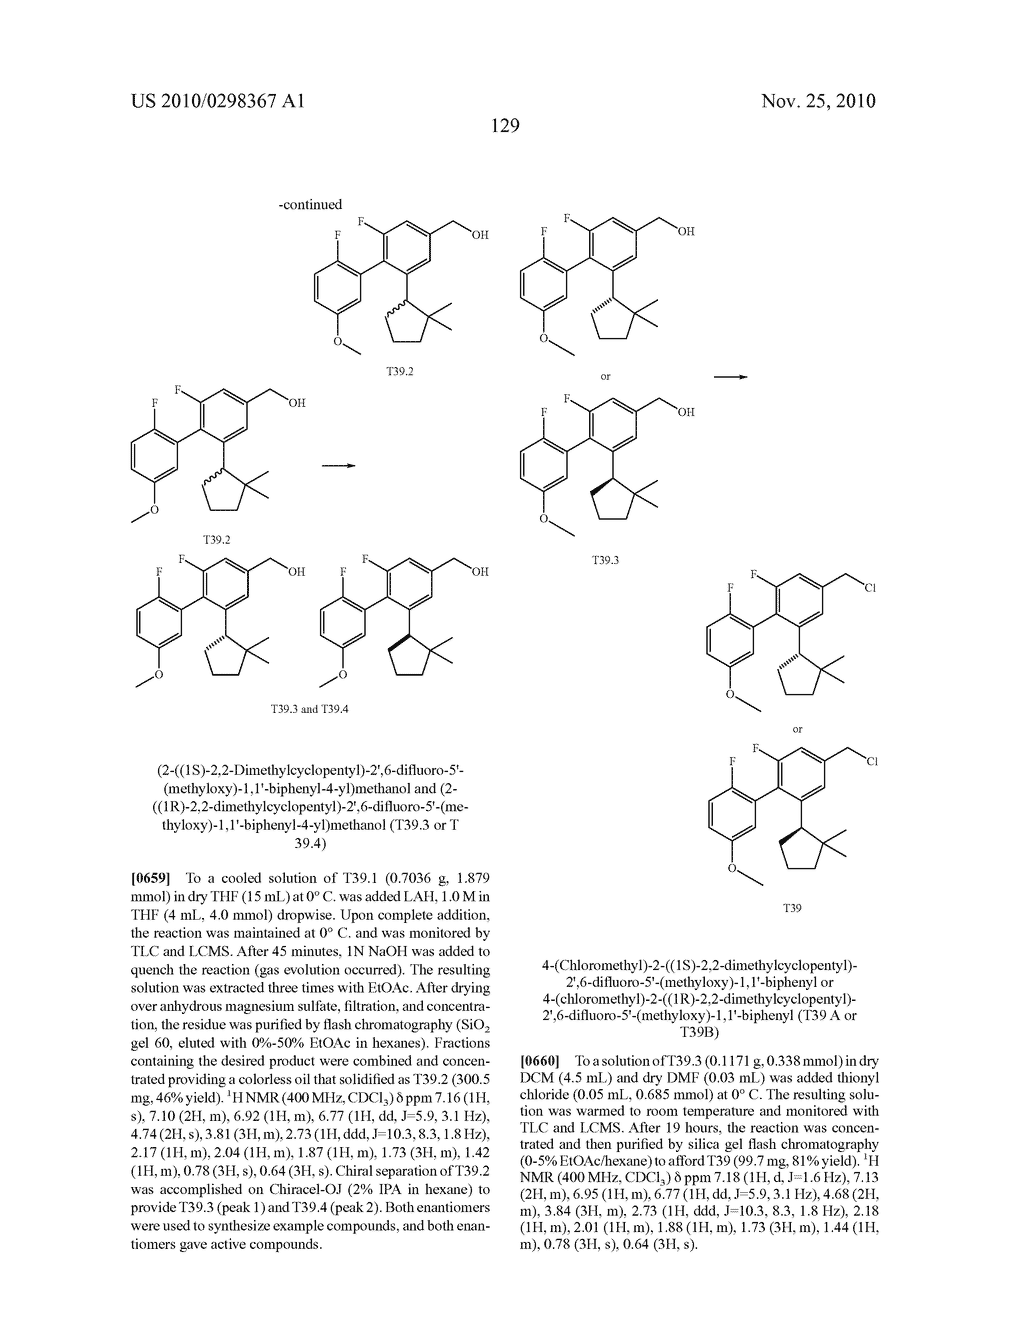 Conformationally Constrained Carboxylic Acid Derivatives Useful for Treating Metabolic Disorders - diagram, schematic, and image 131